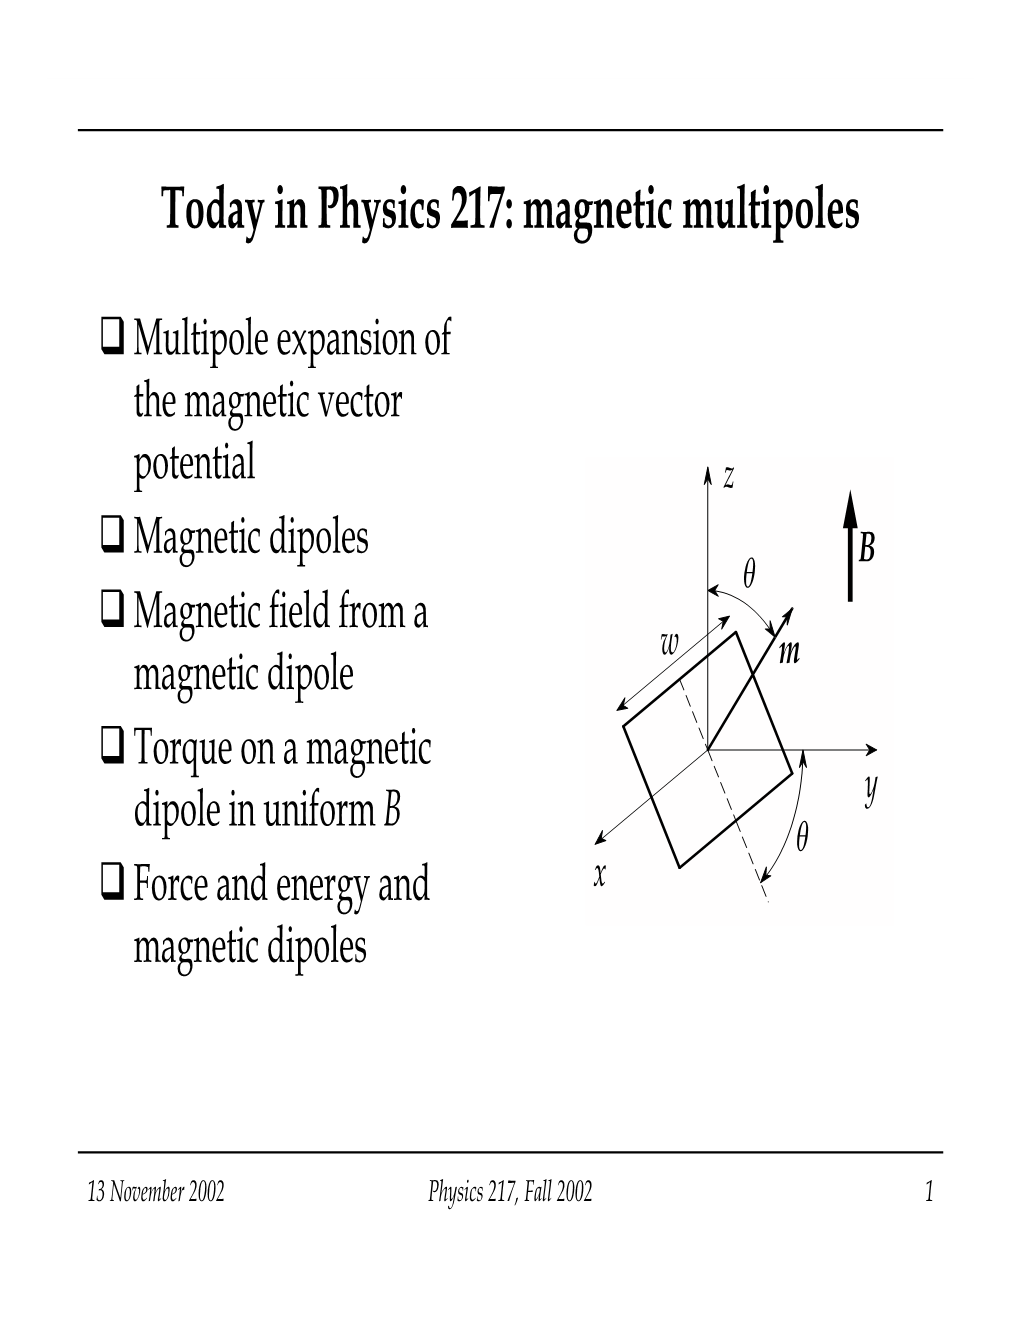 Today in Physics 217: Magnetic Multipoles